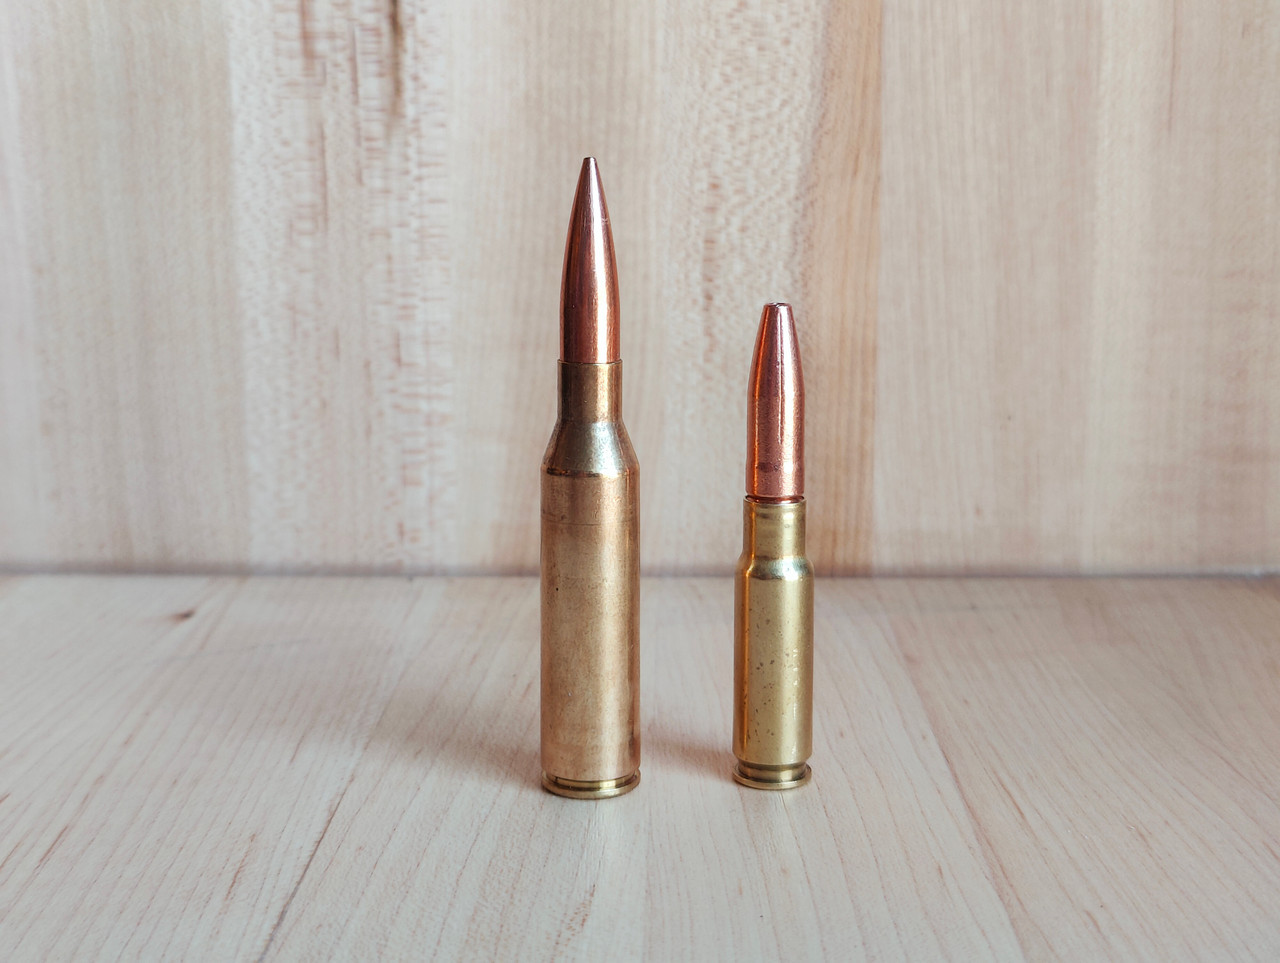 338 Norma Magnum compared to 8.6 Blackout